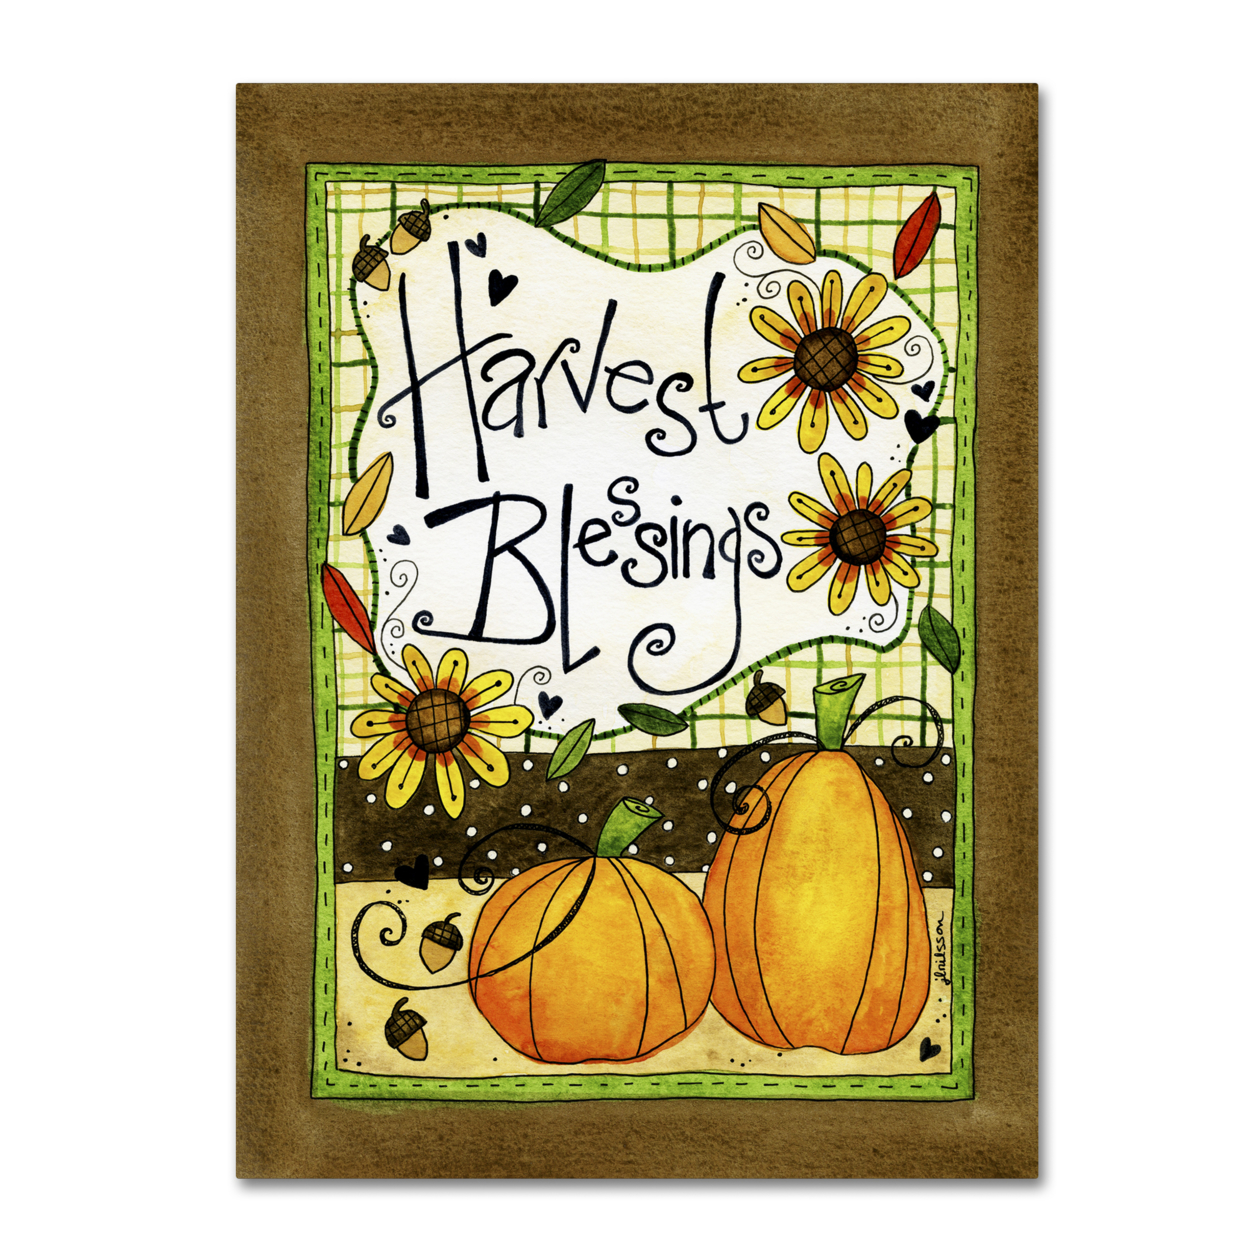 Jennifer Nilsson 'Harvest Blessings' Canvas Wall Art 35 X 47 Inches